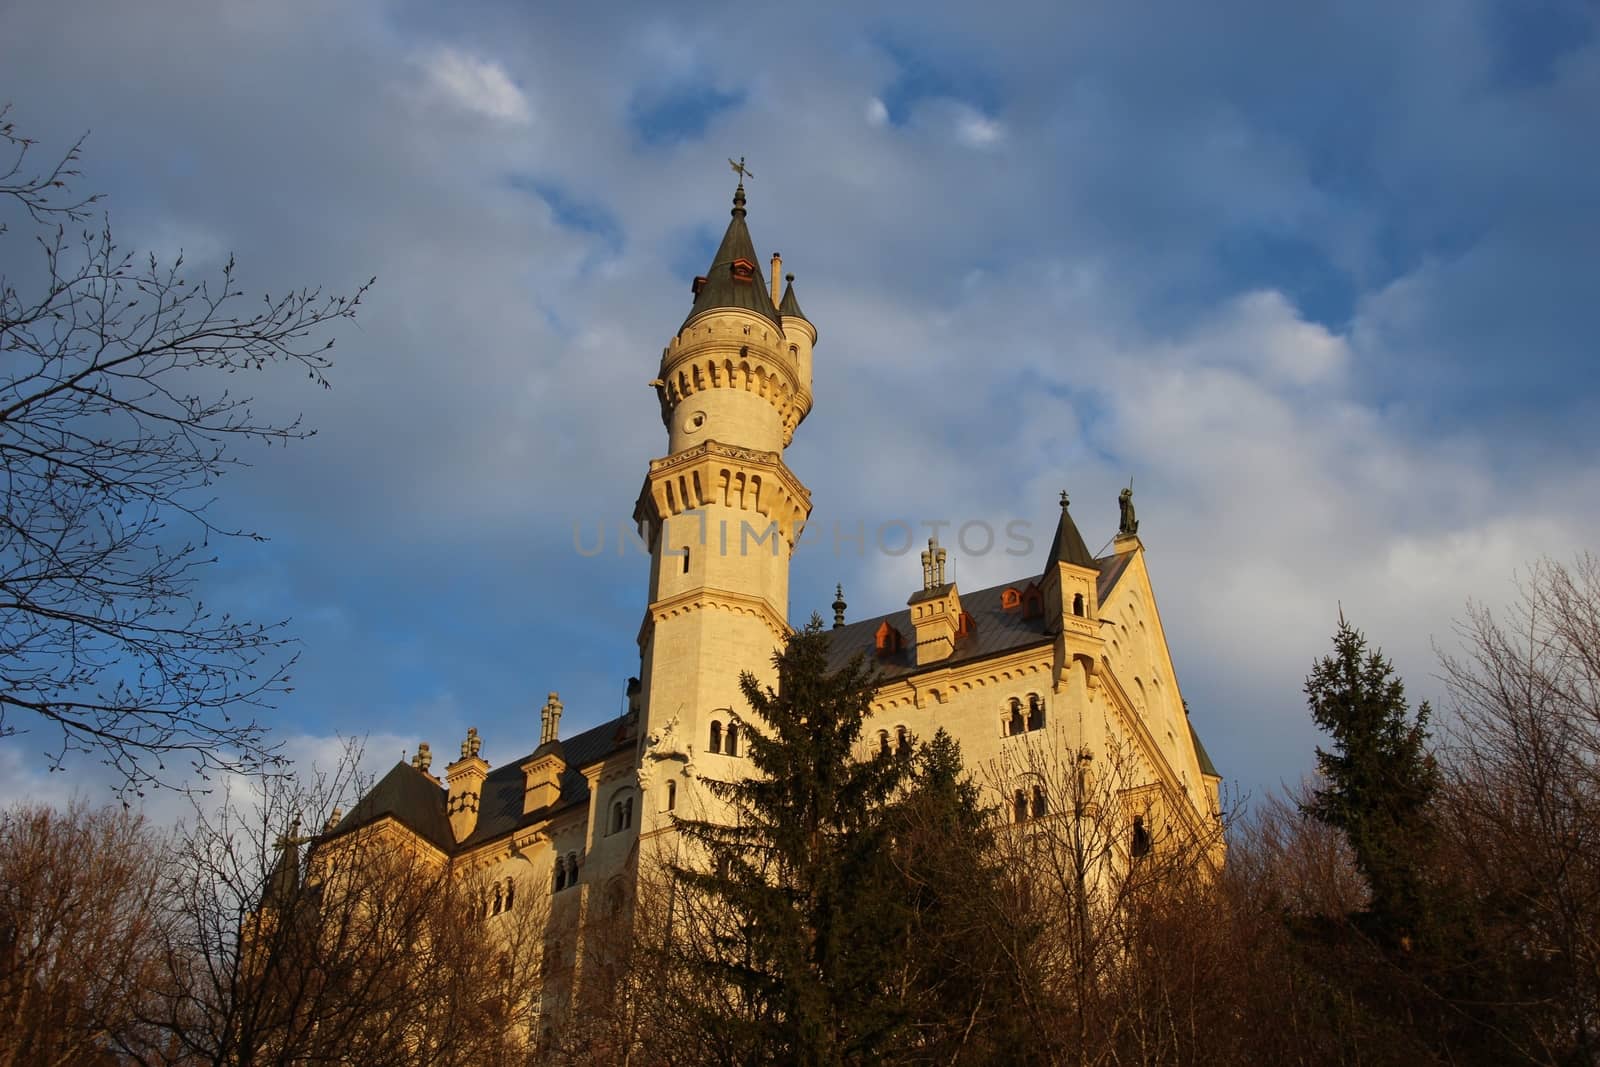 Neuschwanstein Castle is a nineteenth-century palace built by King Ludwig II, located in the mountains above the village of Hohenschwangau in southwest Bavaria, Germany.